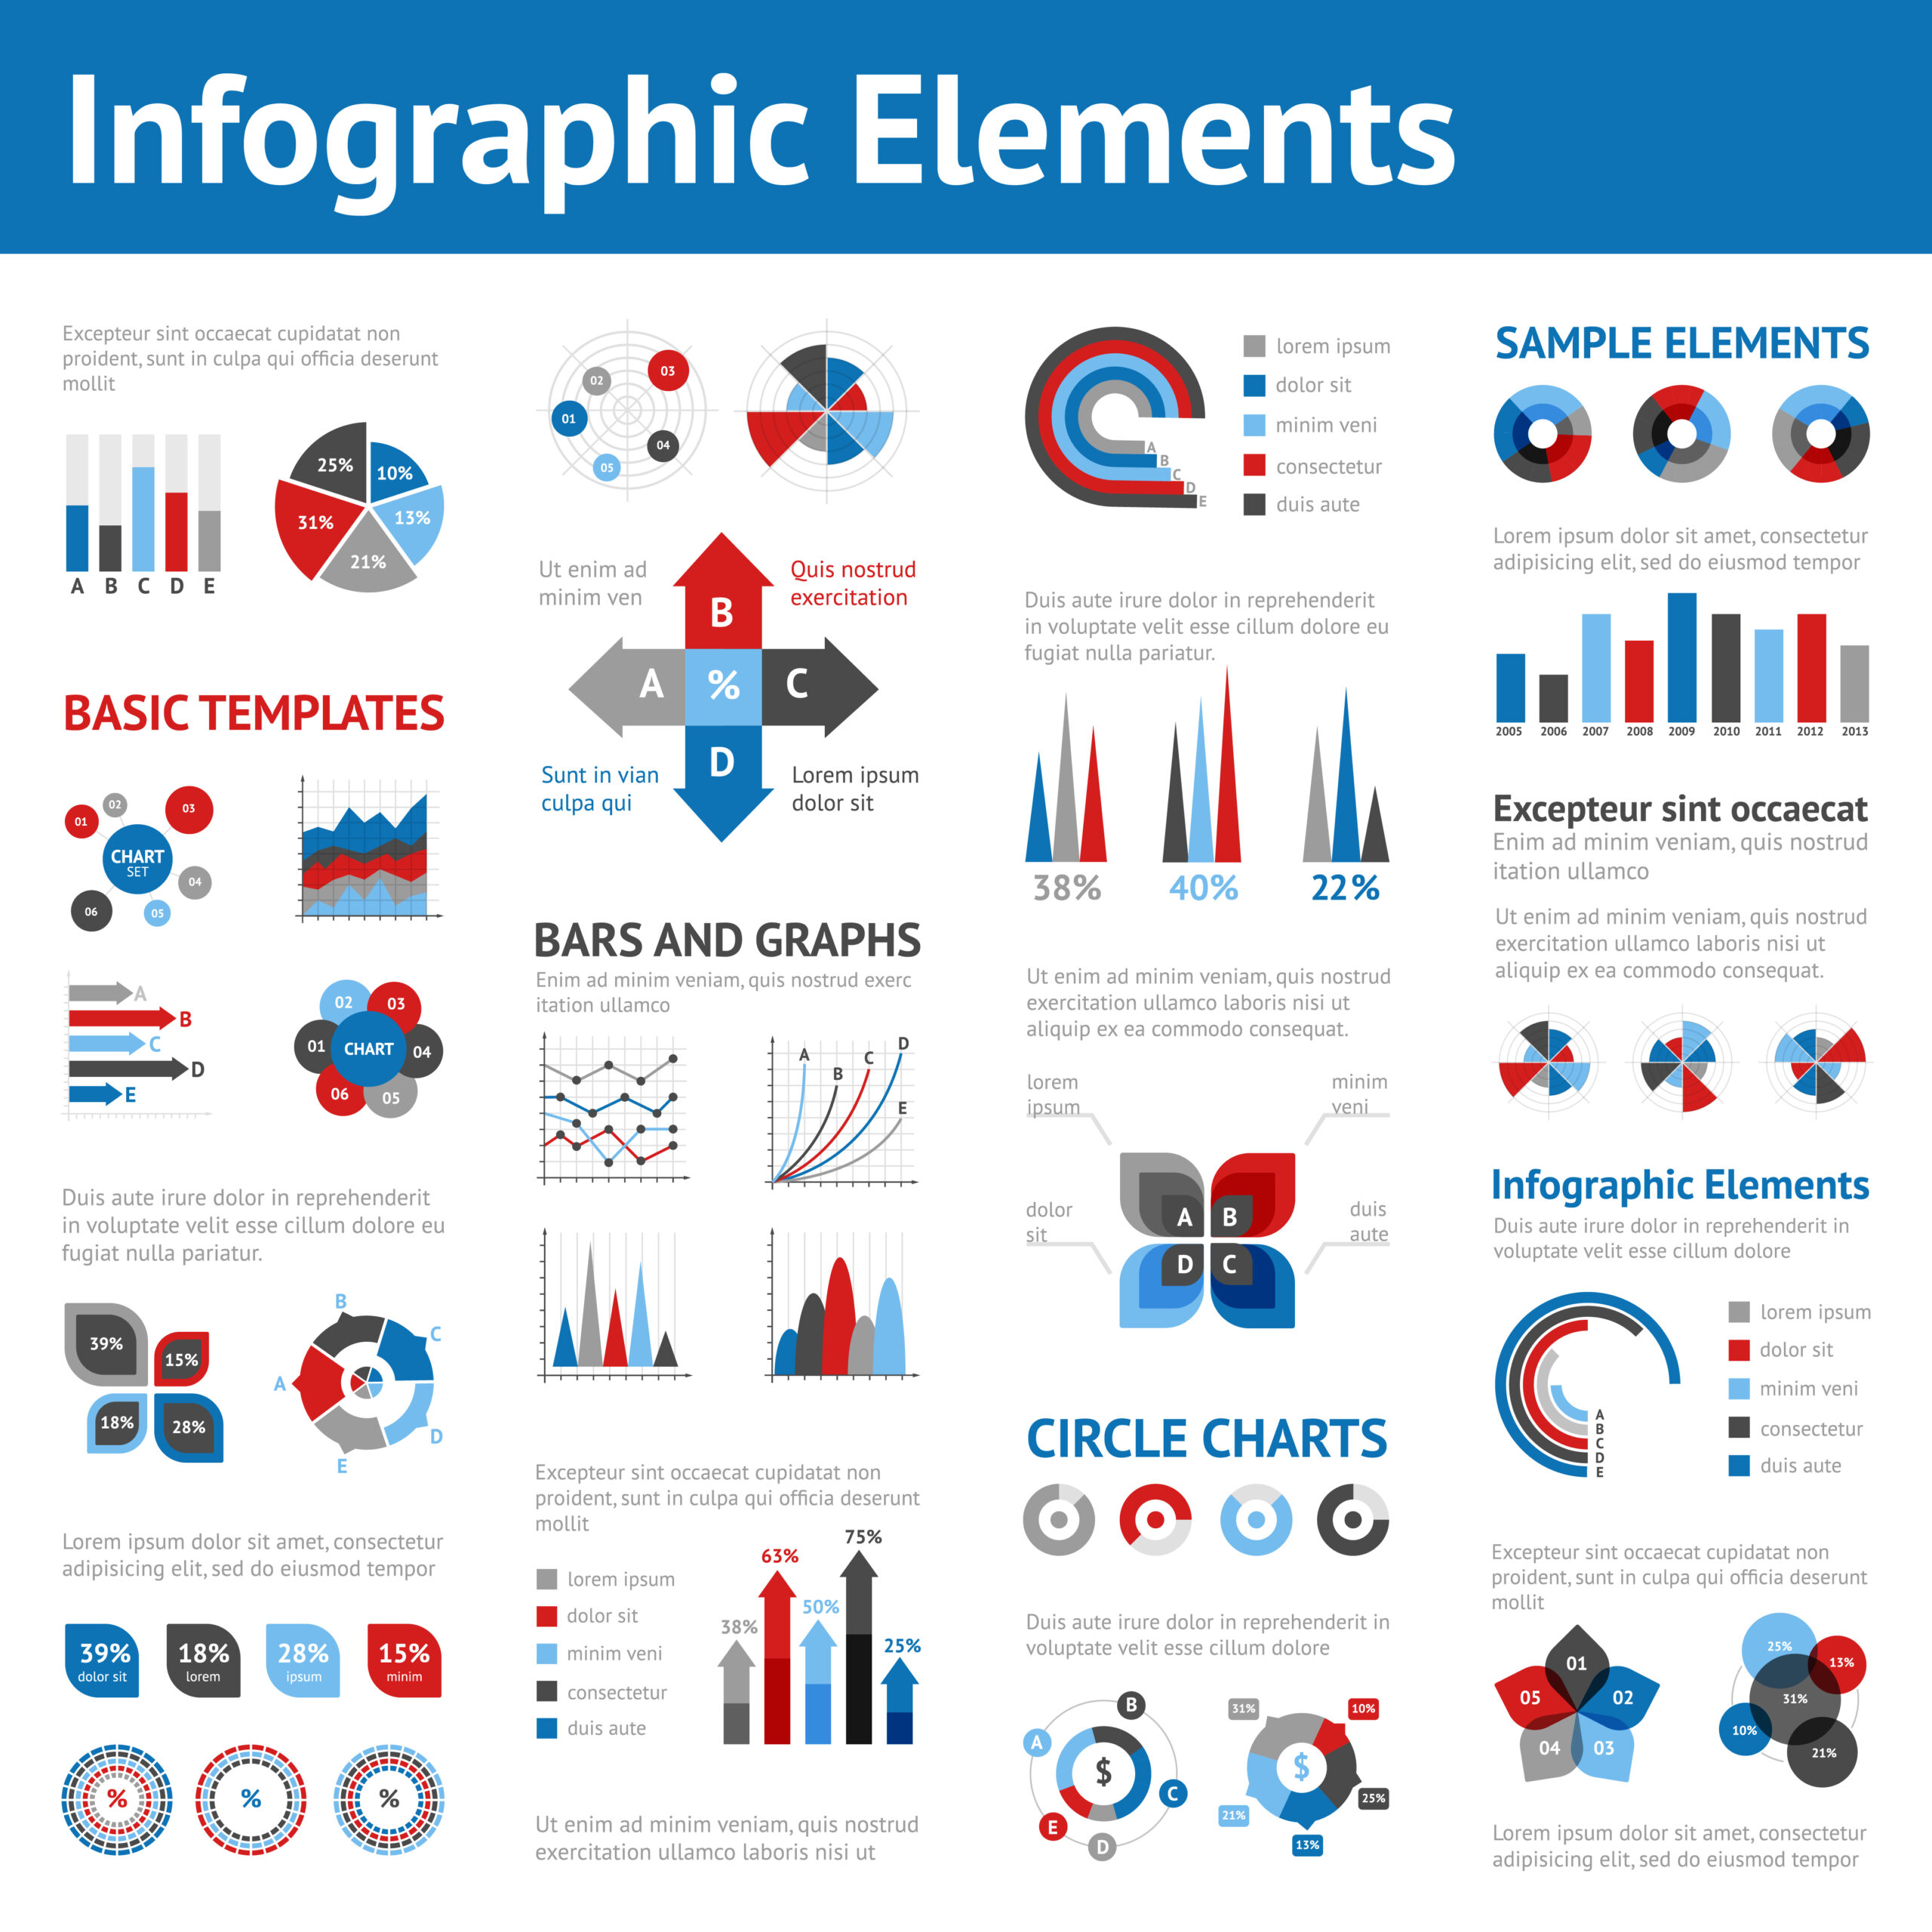 20+ Business Infographic Examples (for Planning, Blogging, Social Media & More) - Venngage